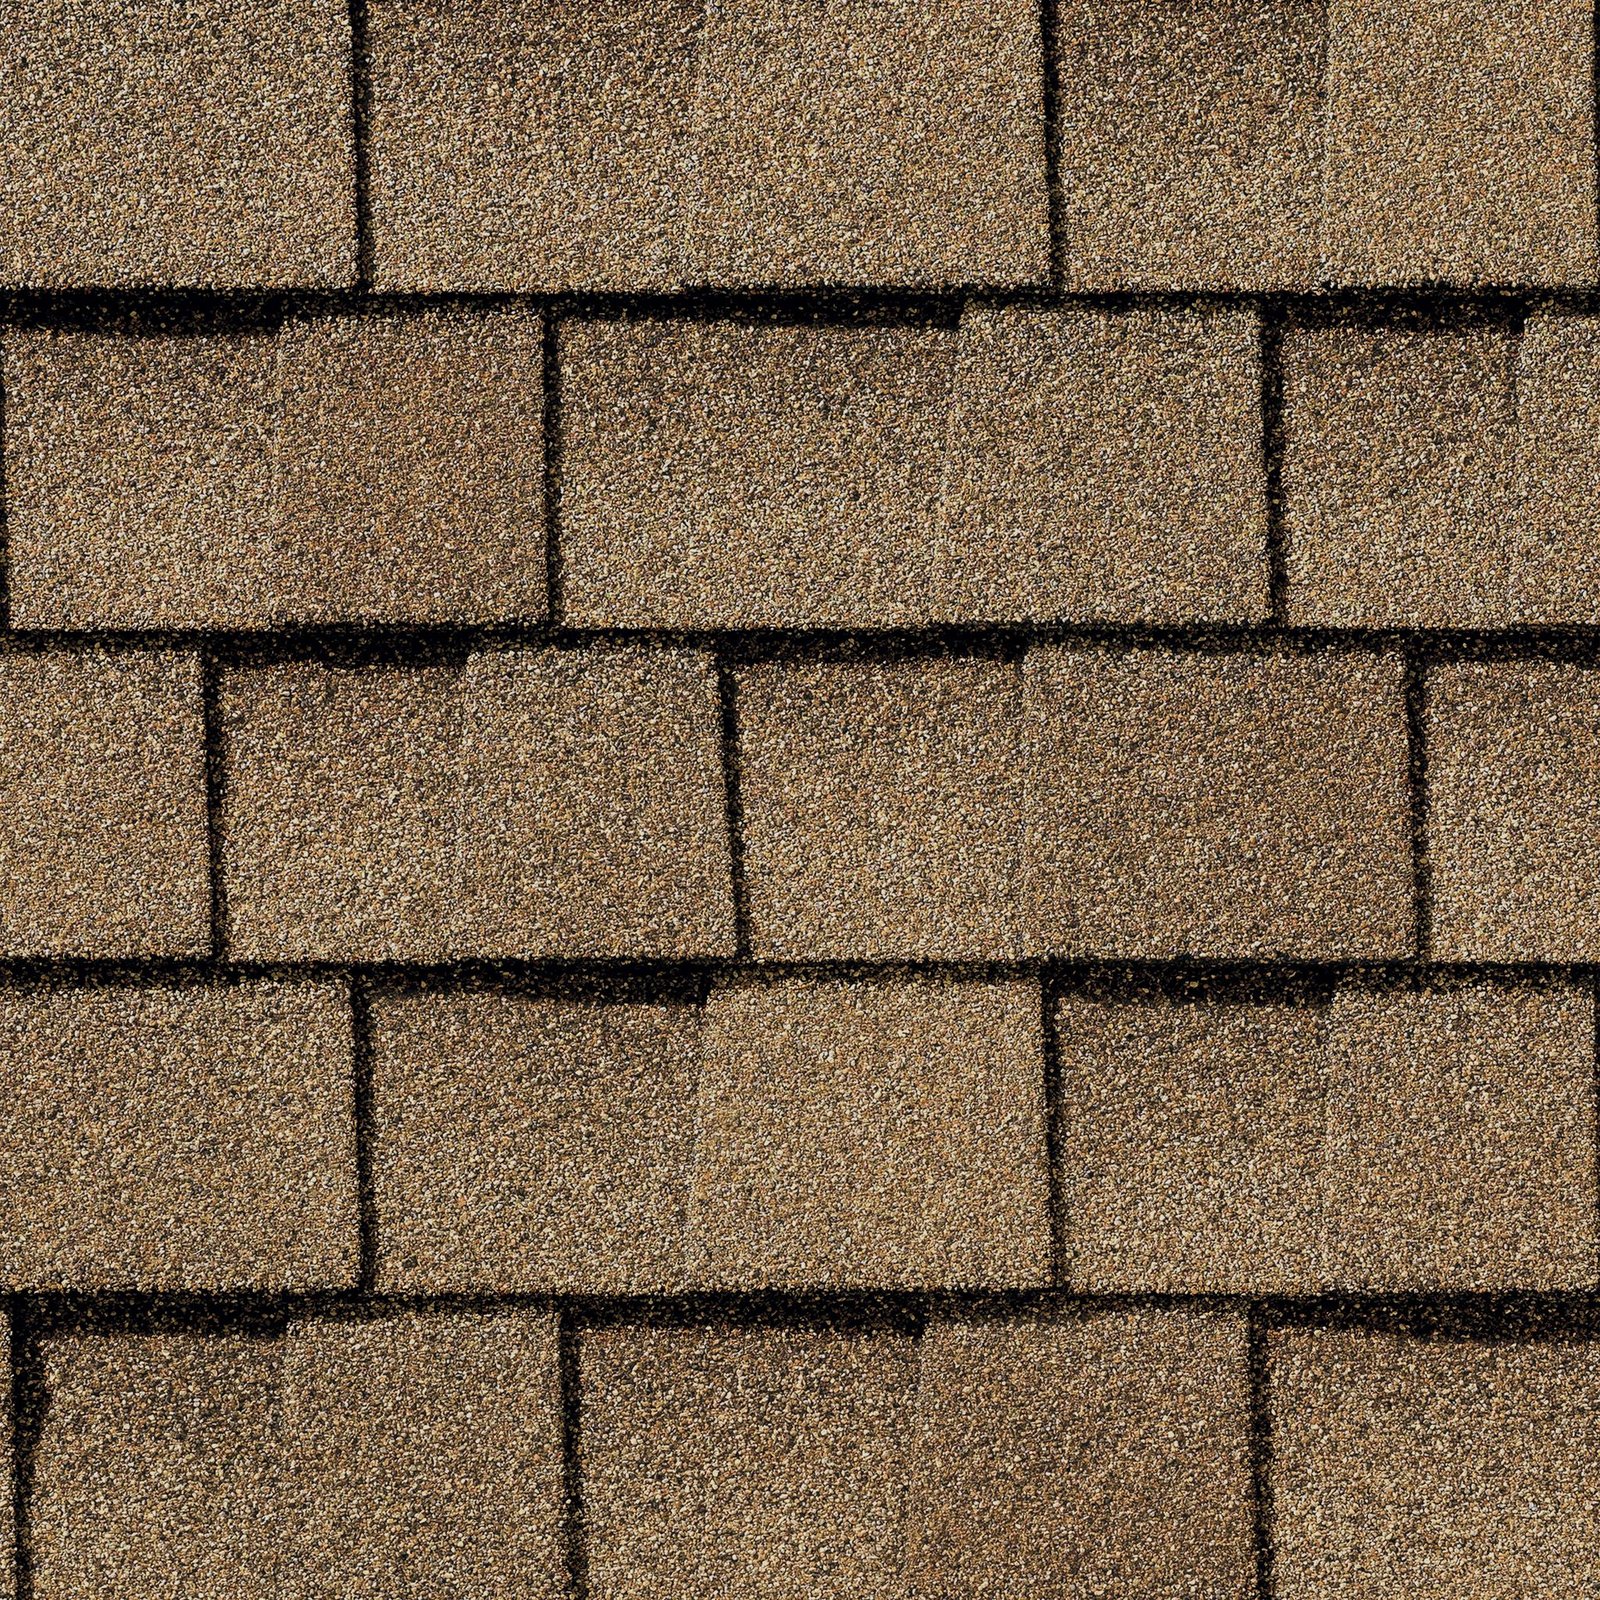 Close up photo of GAF's Timberline Natural Shadow Shakewood shingle swatch